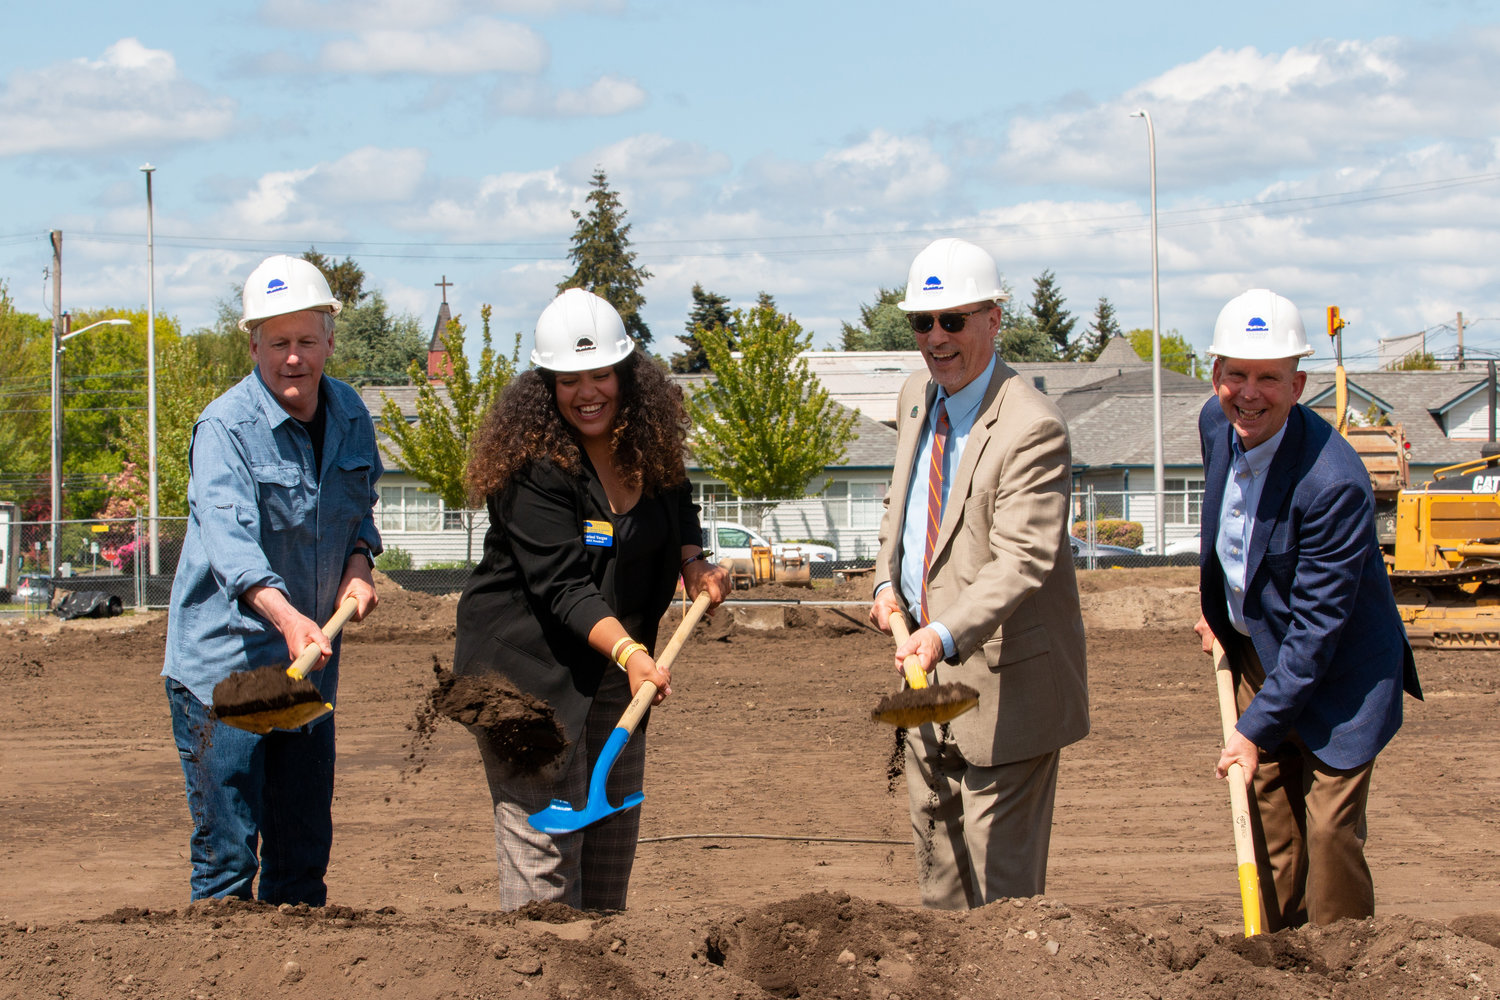 Court Stanley, Board of Trustees member since 2020; Marisol Vargas, Student Body President; Bob Mohrbacher, Centralia College President; and Mark Scheibmeir, Board of Trustees member since 2017, shovel dirt at the groundbreaking event for the Centralia College multi-purpose athletic field Wednesday afternoon.